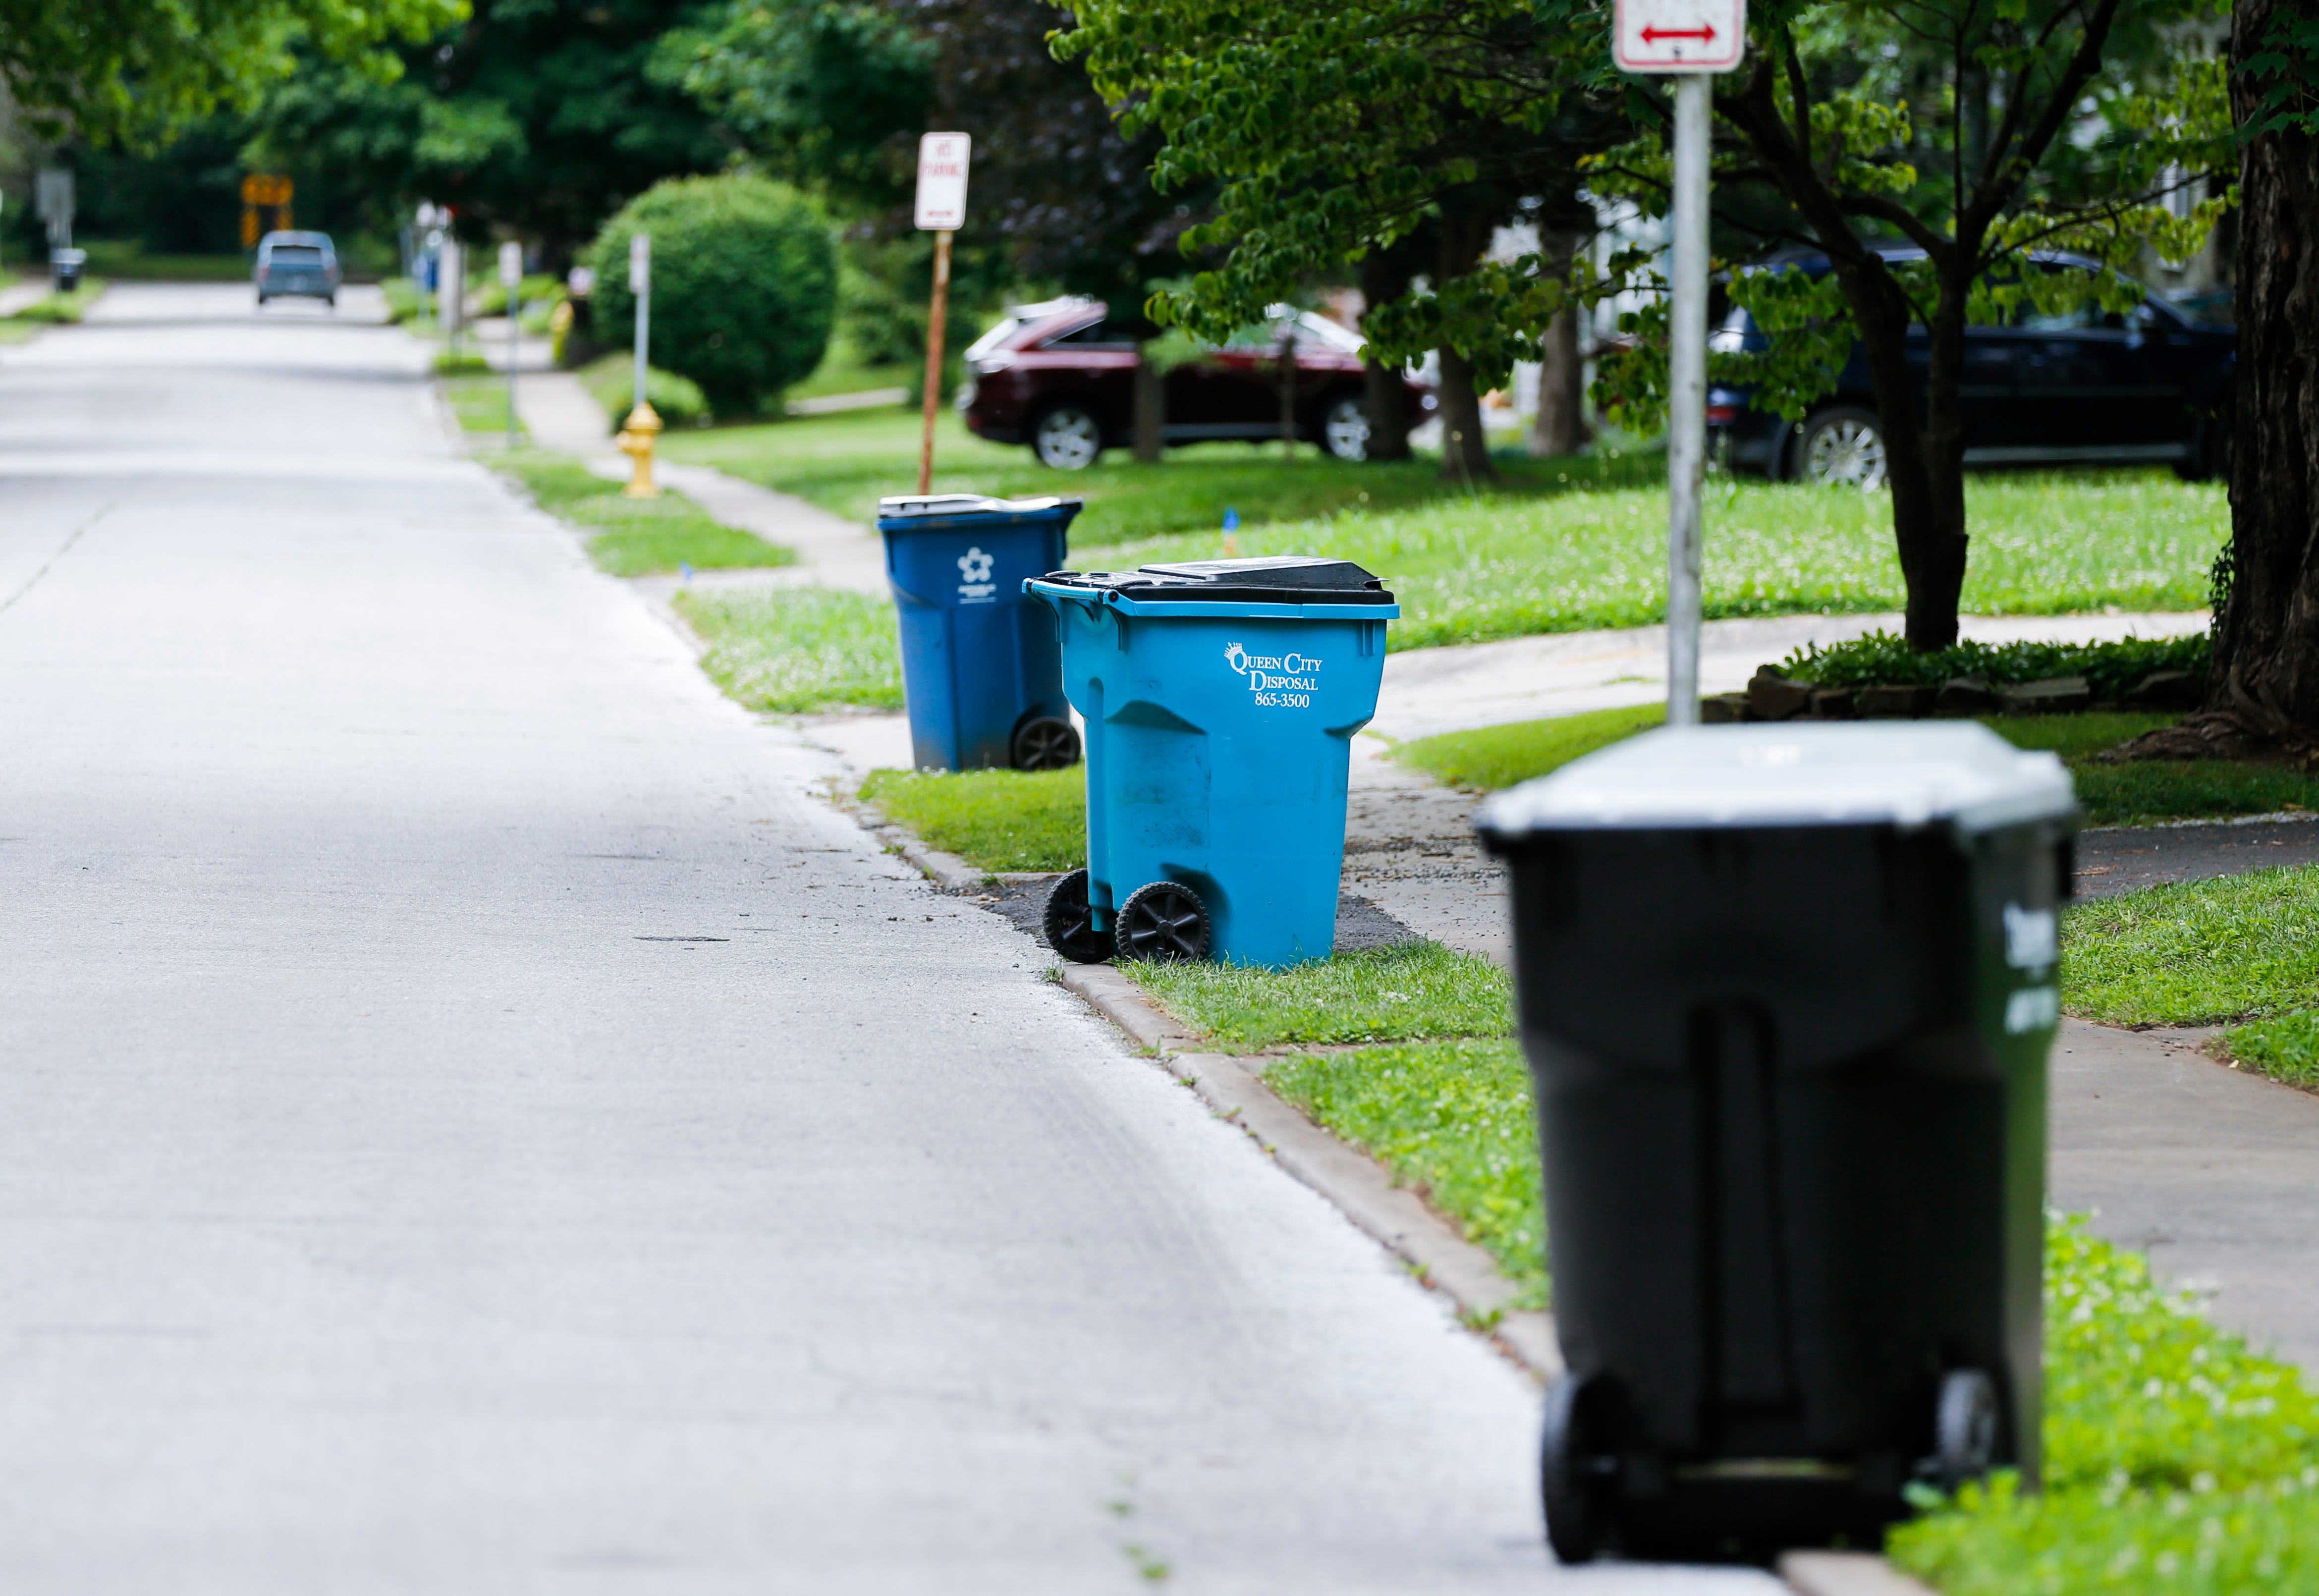 Talking trash ... again? City Council to revisit options for trash collection changes